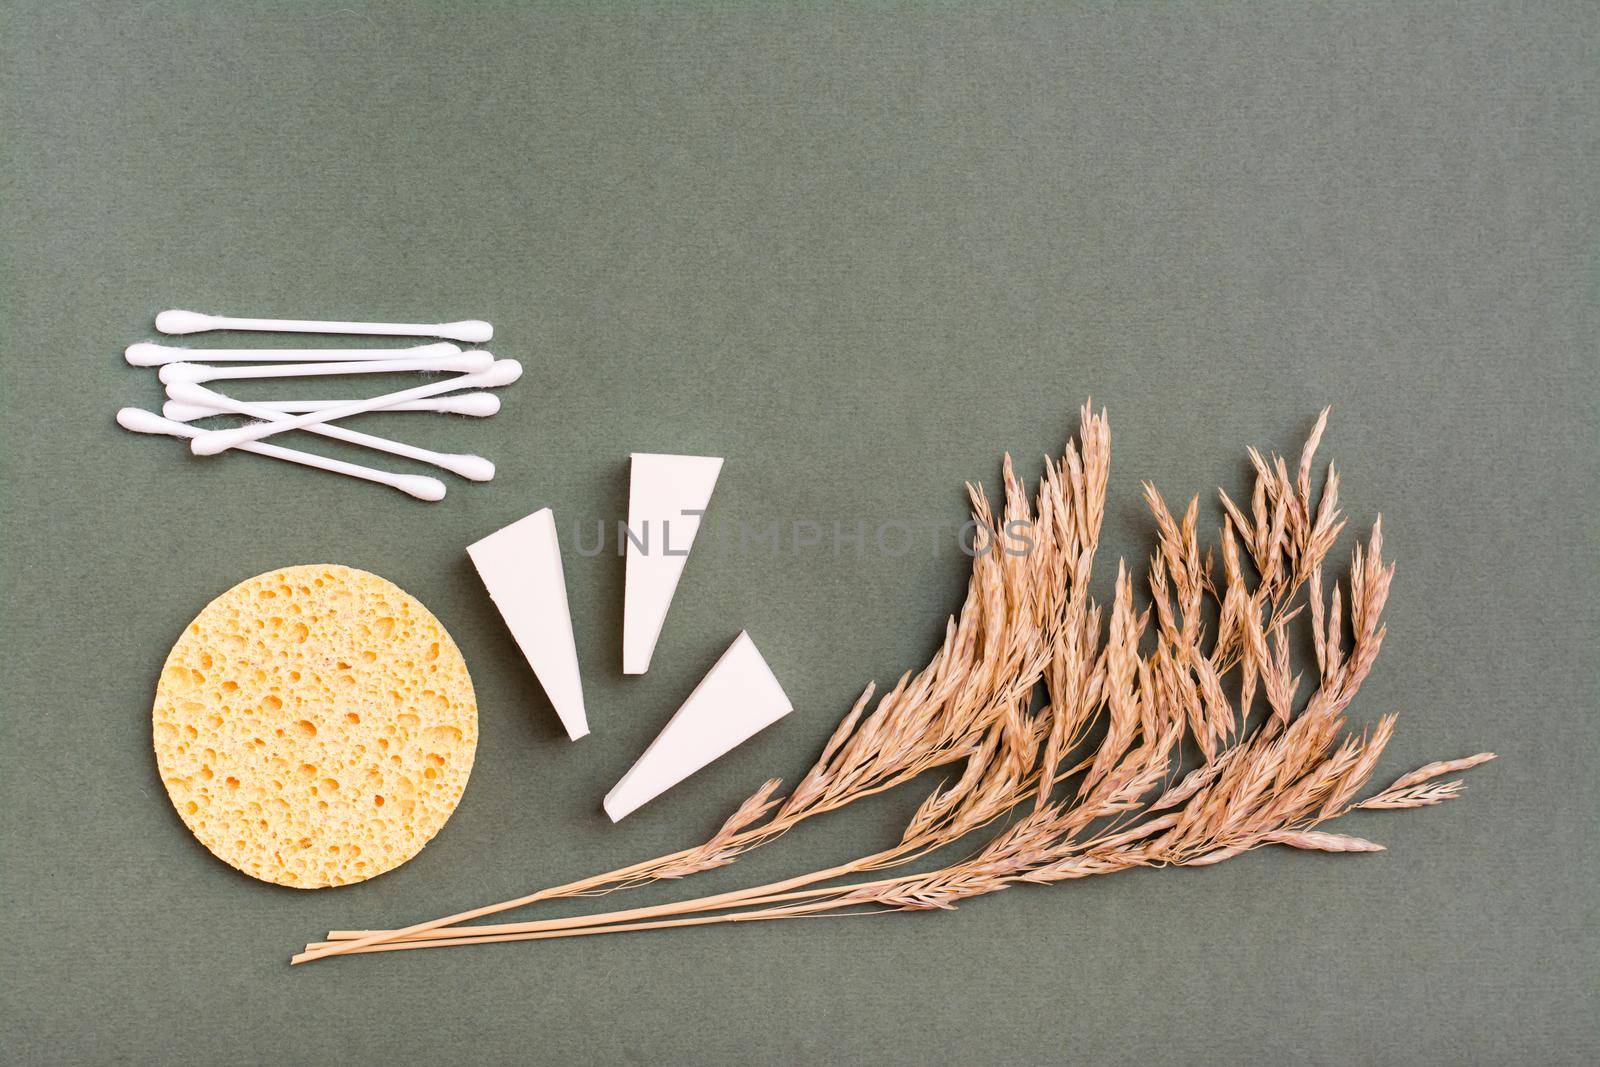 Makeup items. Two types of sponges, cotton swabs and ears of grass on a green background. Copy space